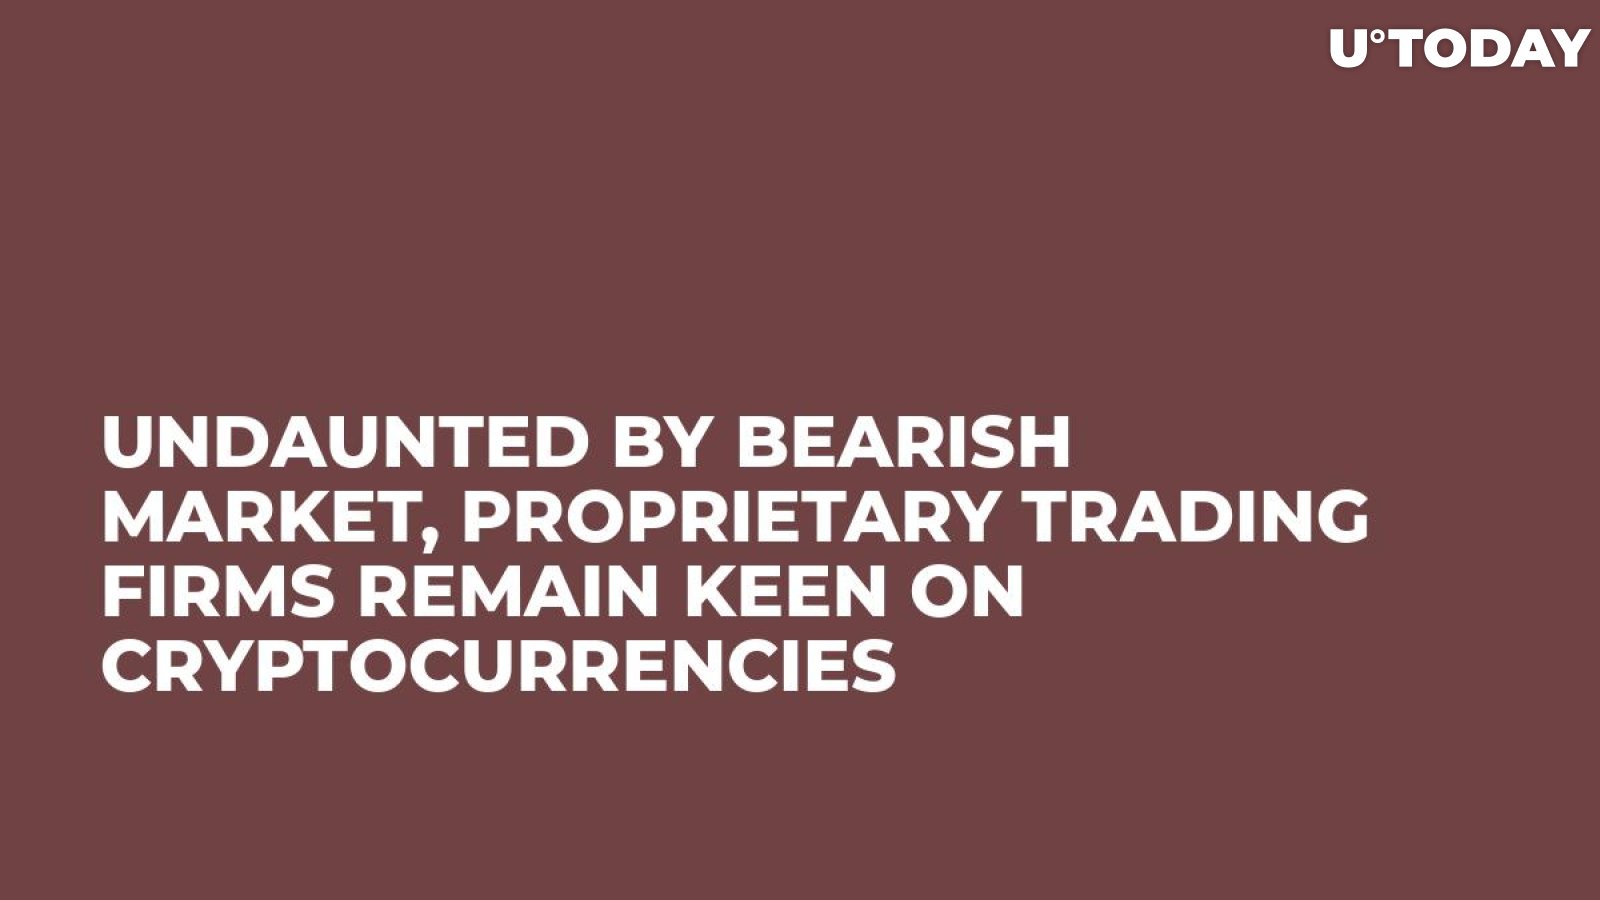 Undaunted by Bearish Market, Proprietary Trading Firms Remain Keen on Cryptocurrencies 